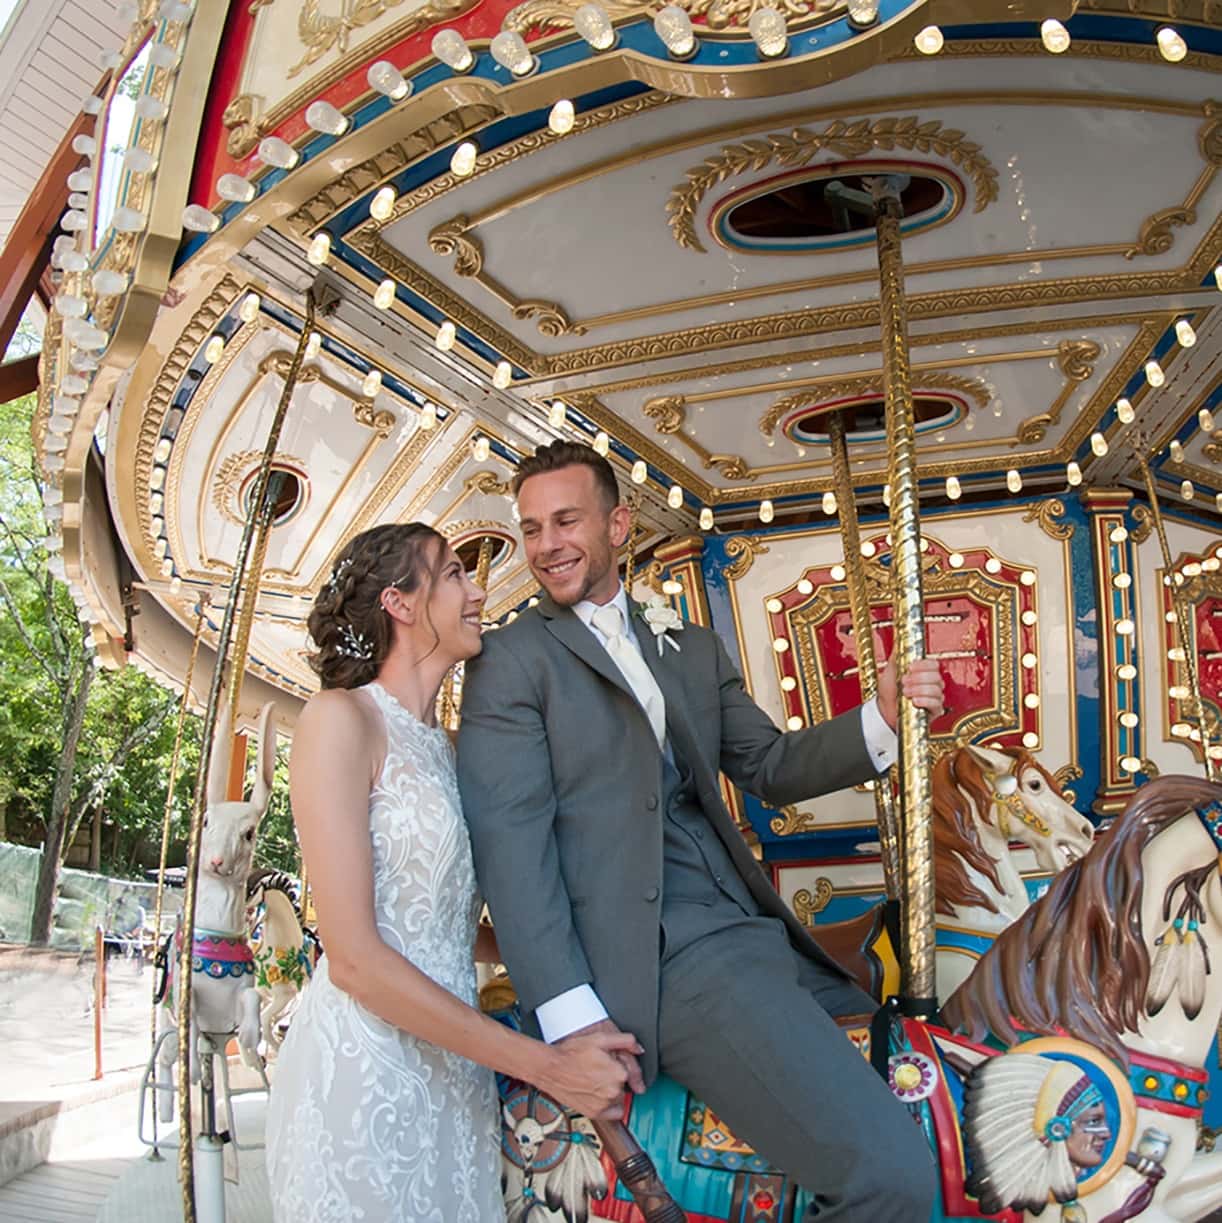 Newly married couple on carousel at Elmwood Park Zoo 